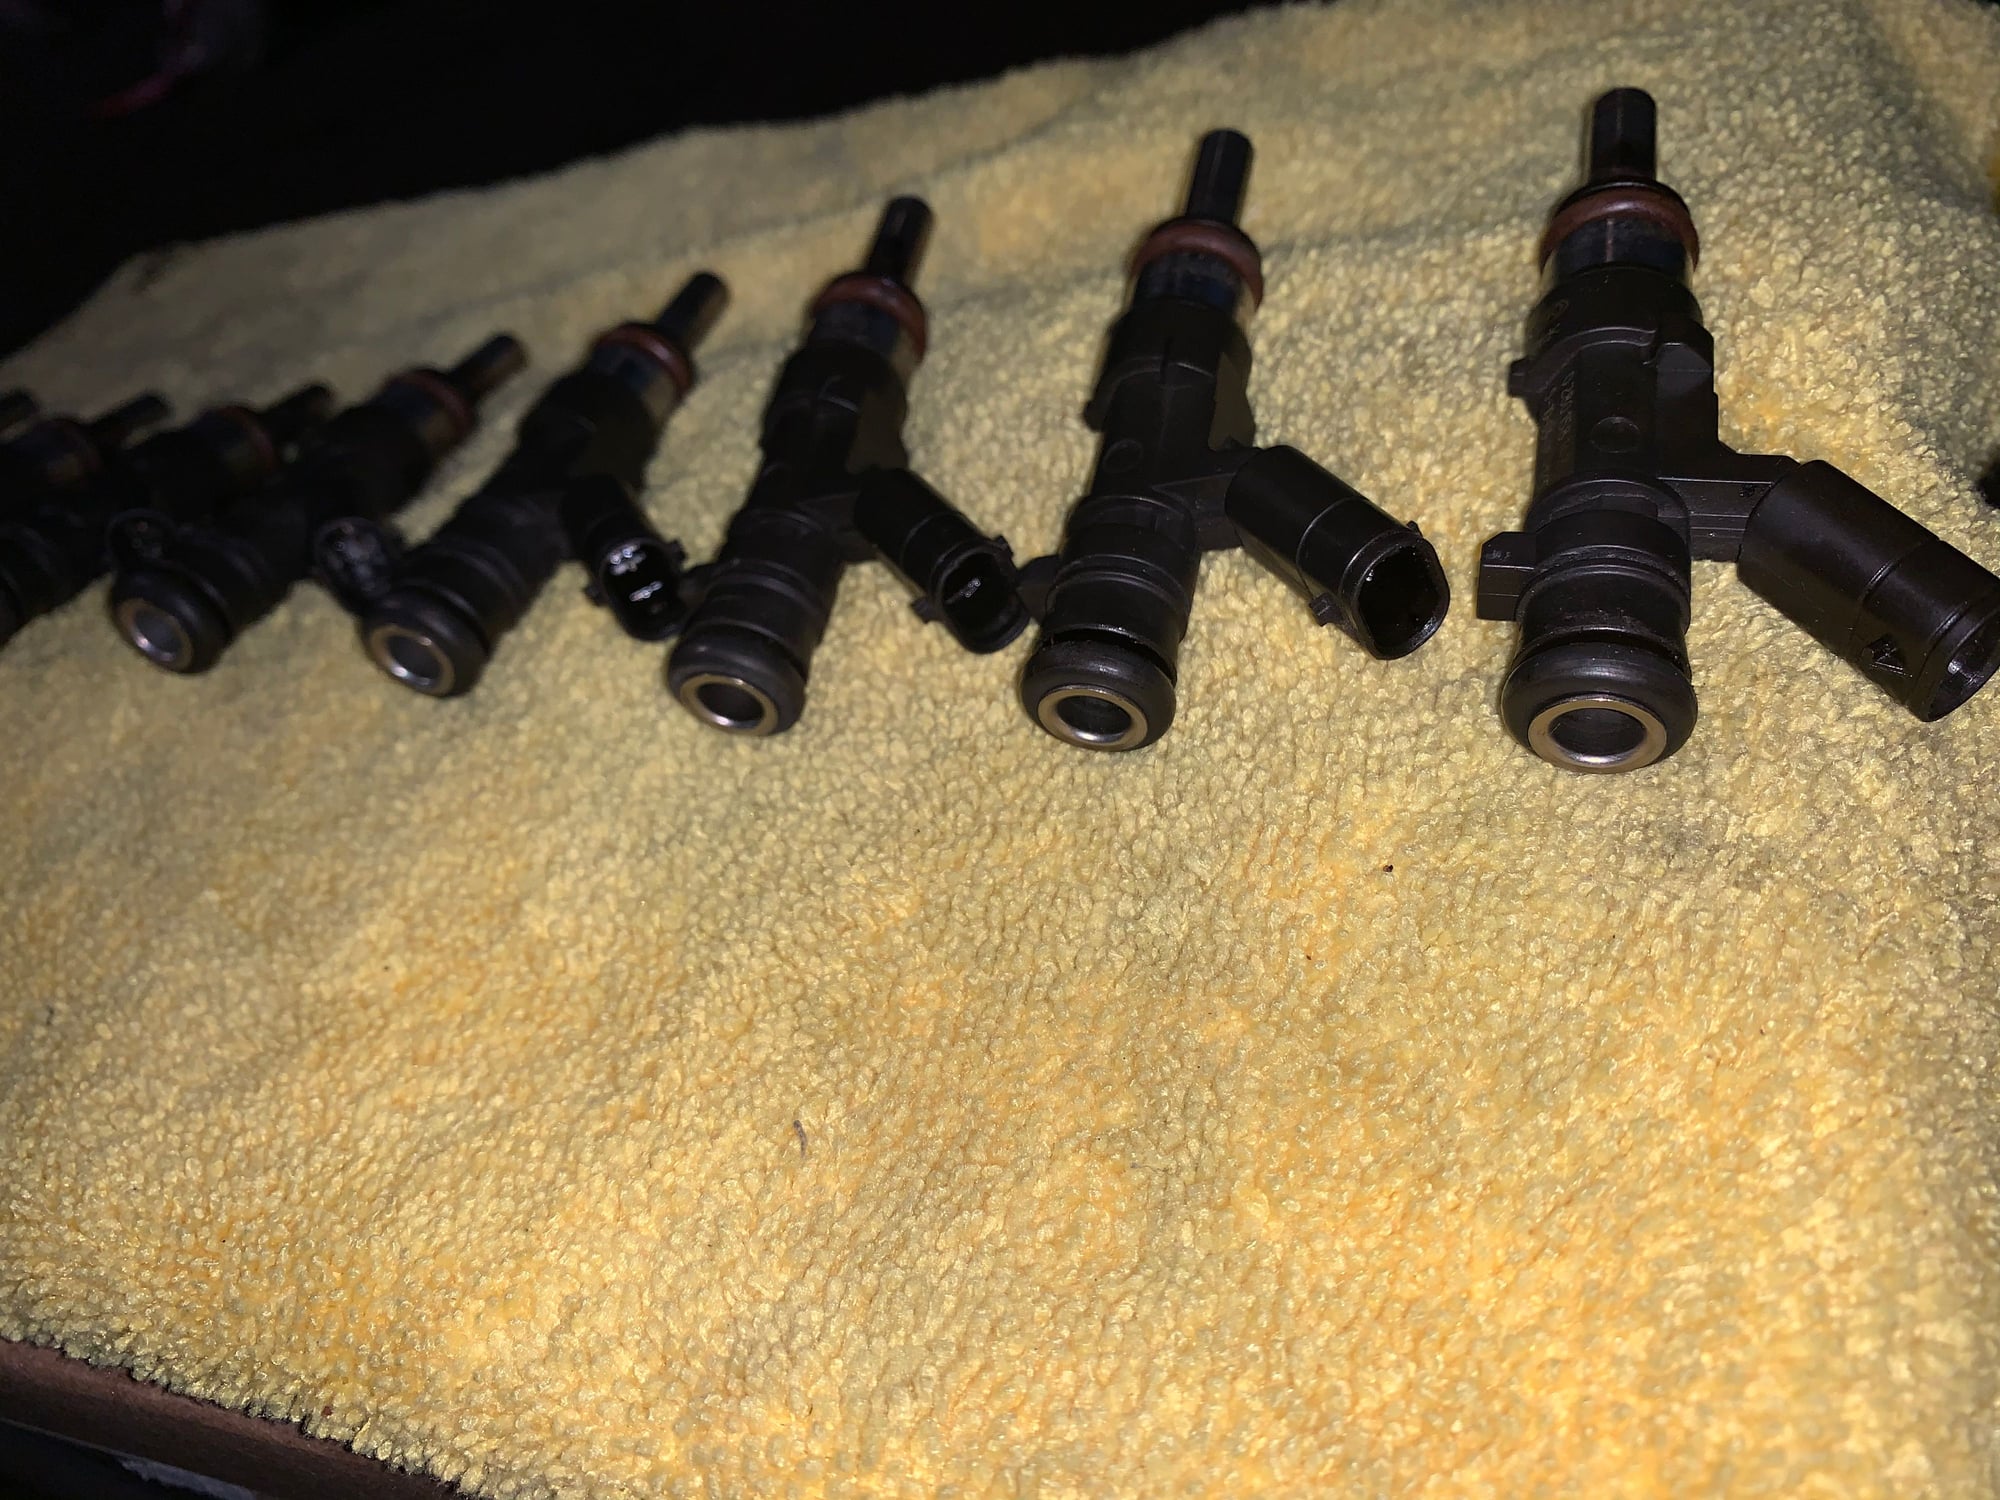 Engine - Intake/Fuel - Used Mercedes Fuel Injectors - Bosch - Used - 2007 to 2009 Mercedes-Benz E63 AMG - Westchester, NY 10710, United States